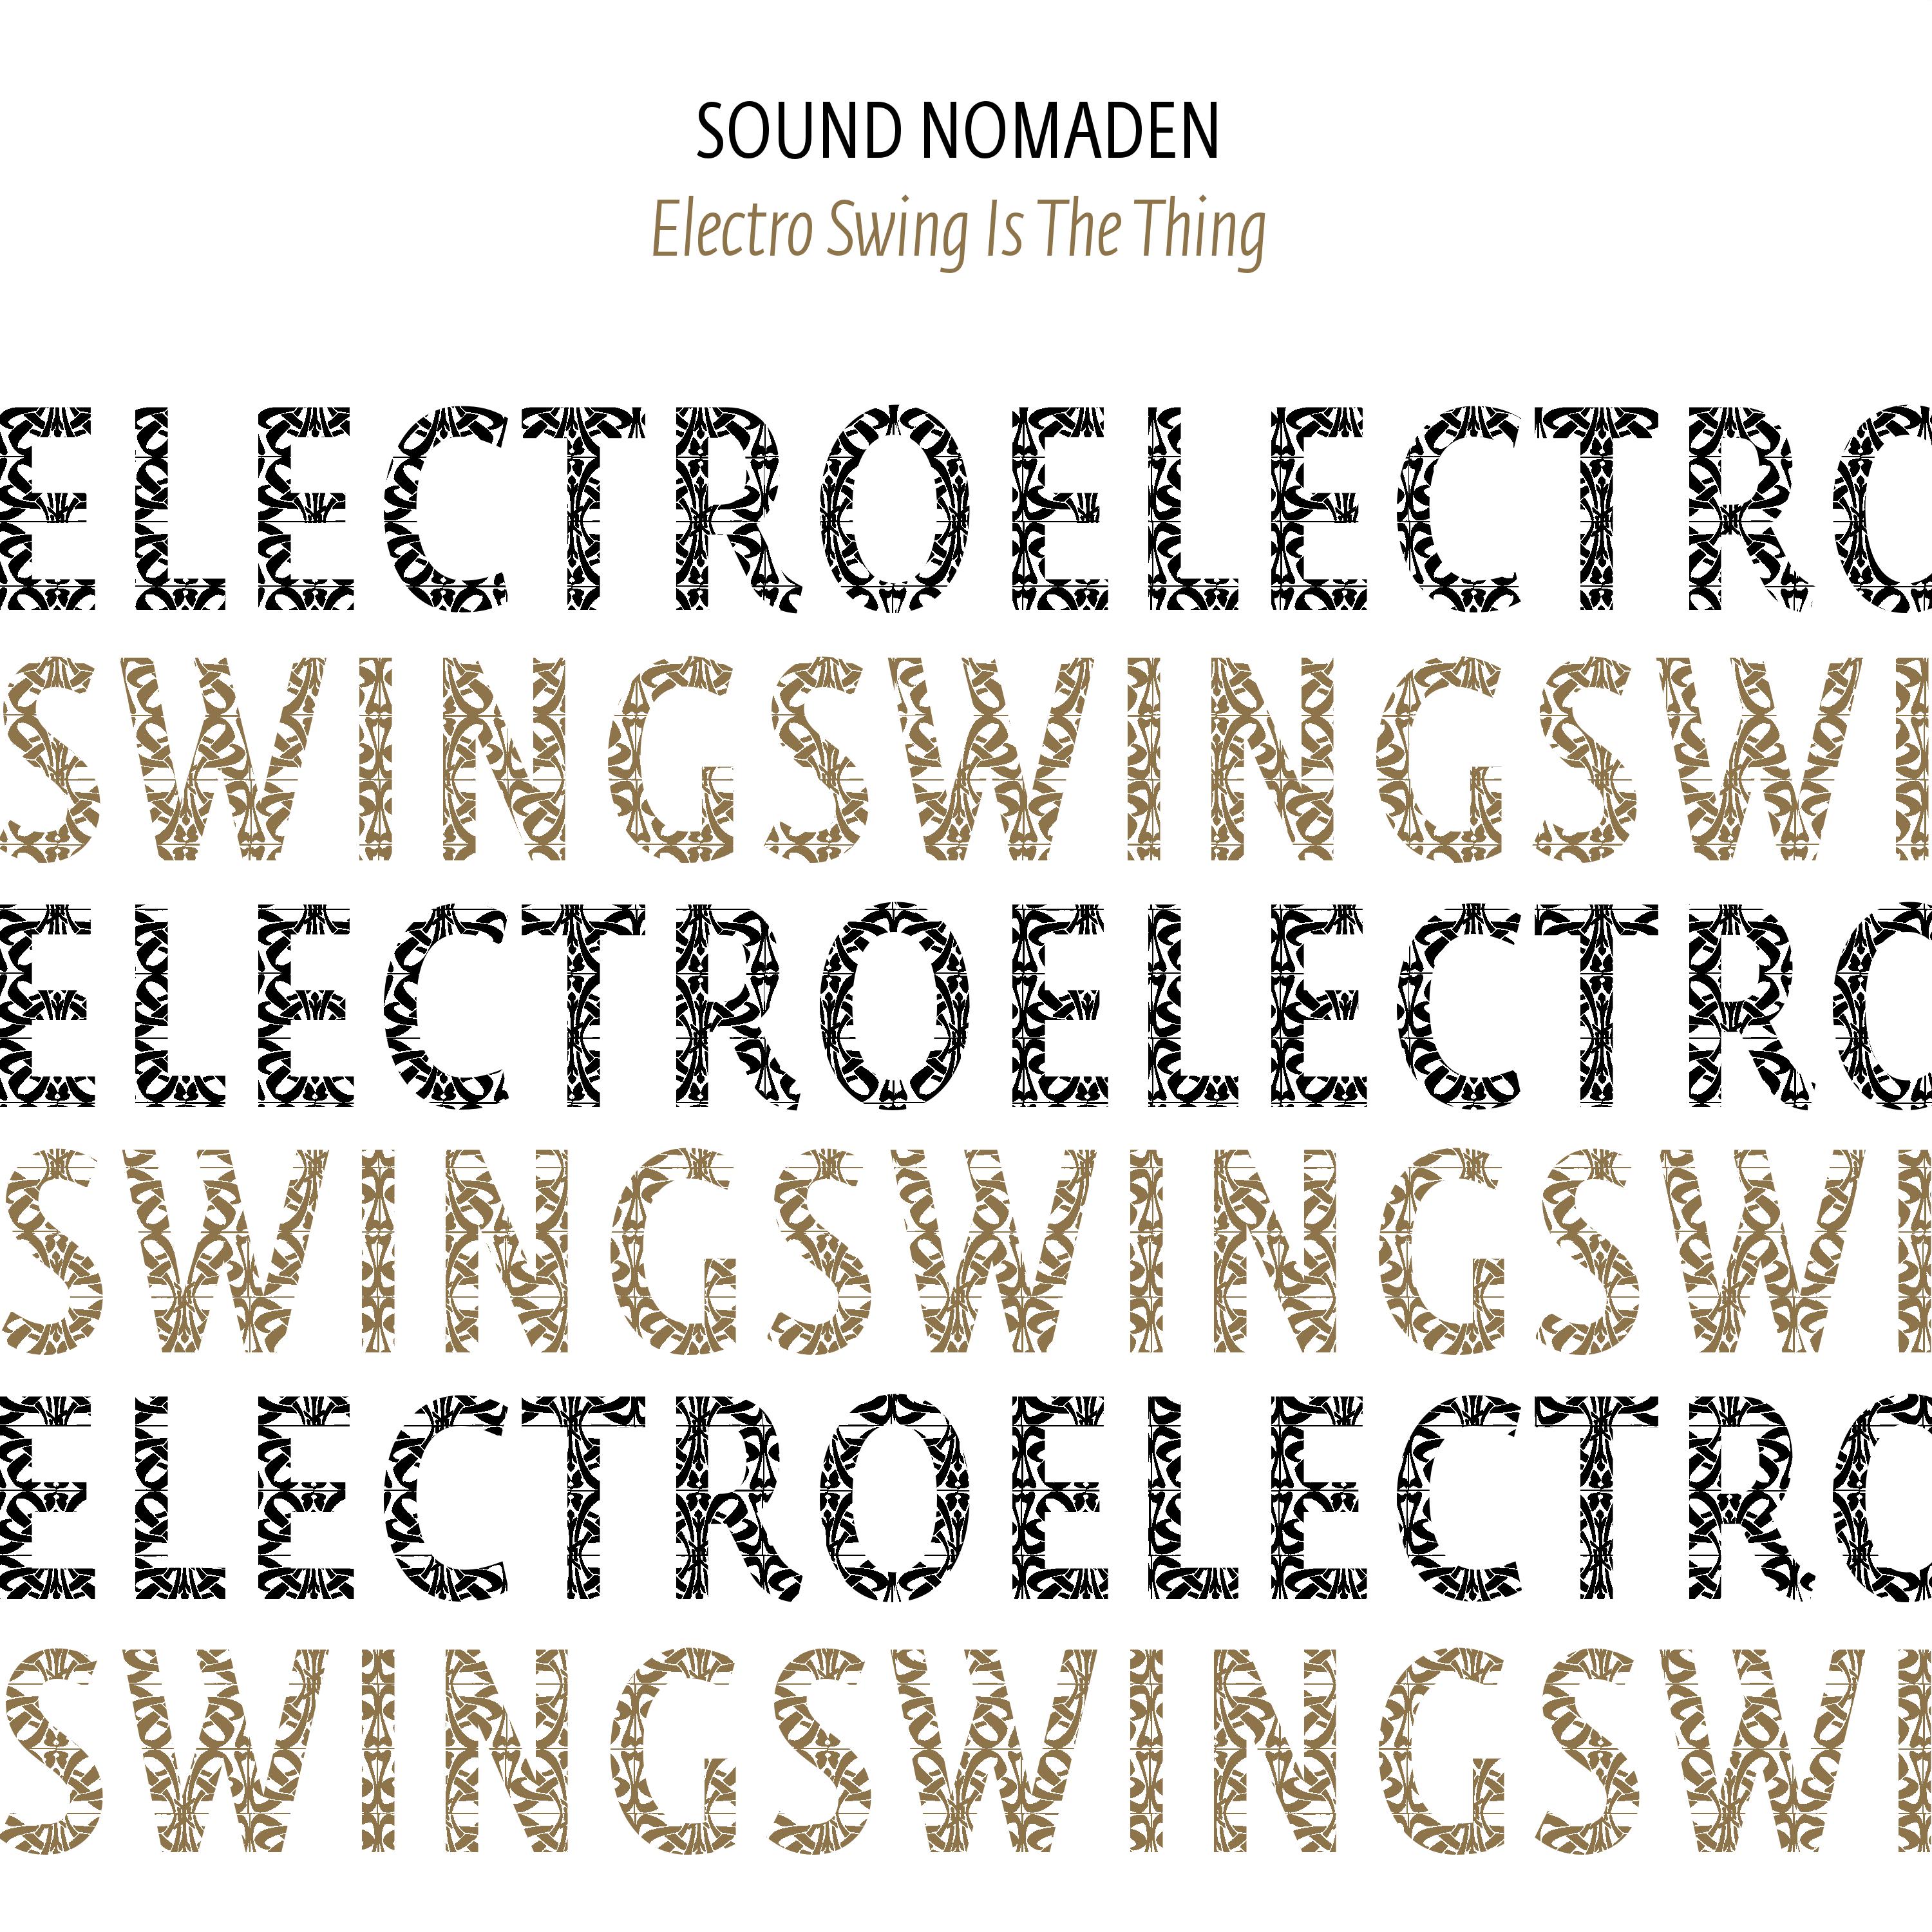 Electro Swing Is the Thing